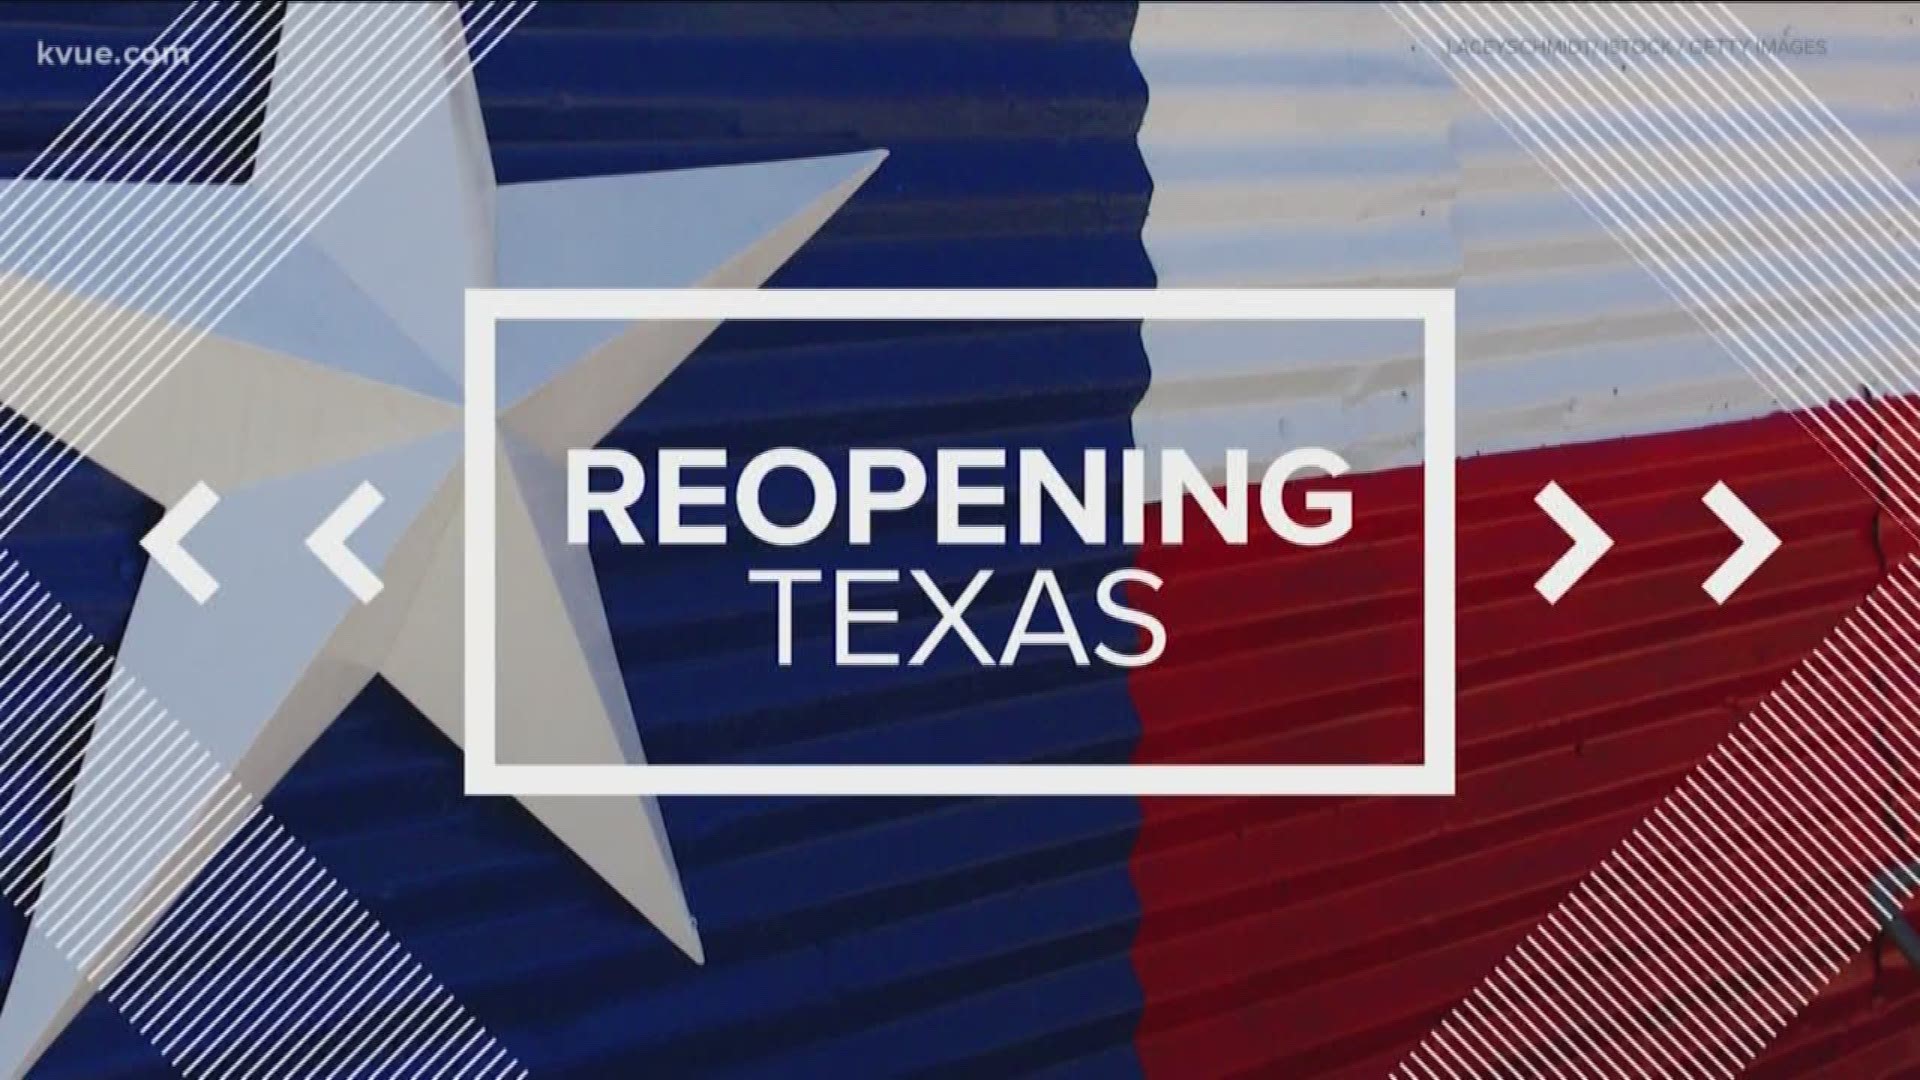 KVUE Political Anchor Ashley Goudeau answers some of your questions about Gov. Abbott's order allowing some businesses to reopen.